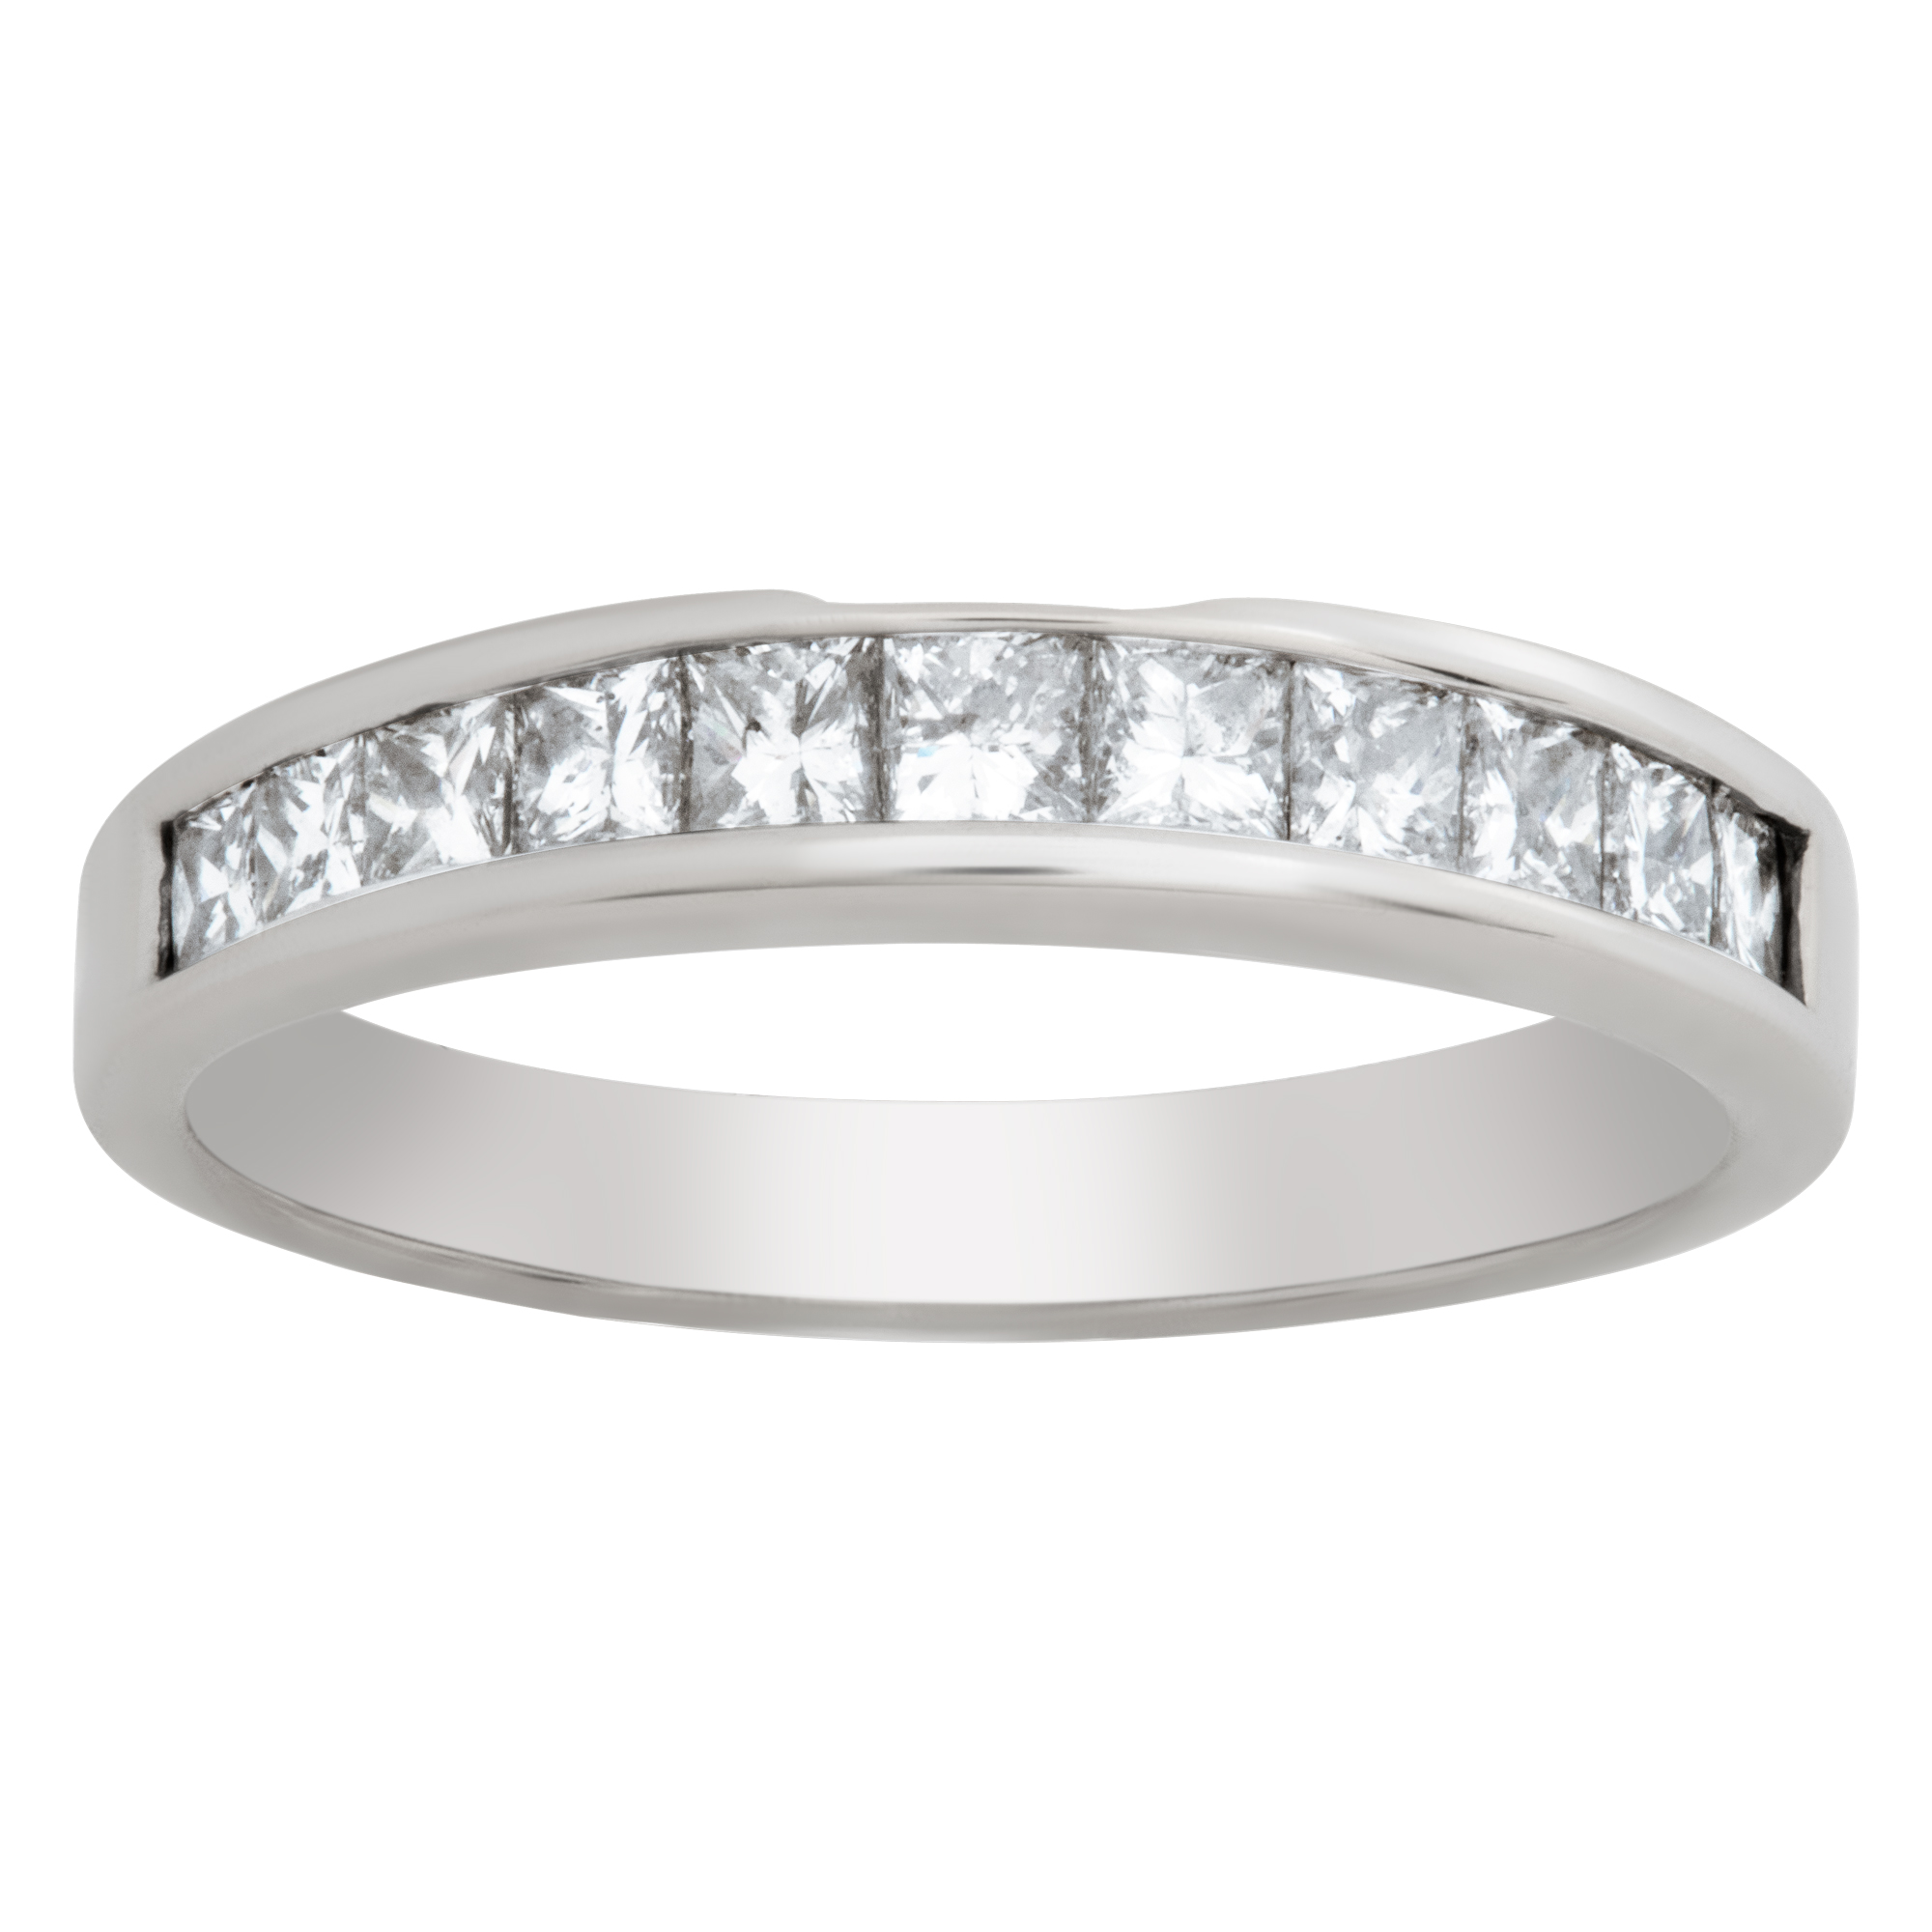 Diamond Semi Eternity Band and Ring in elegant 14k white gold with app. 1 carat in princess cut diamonds. Size 8. image 1